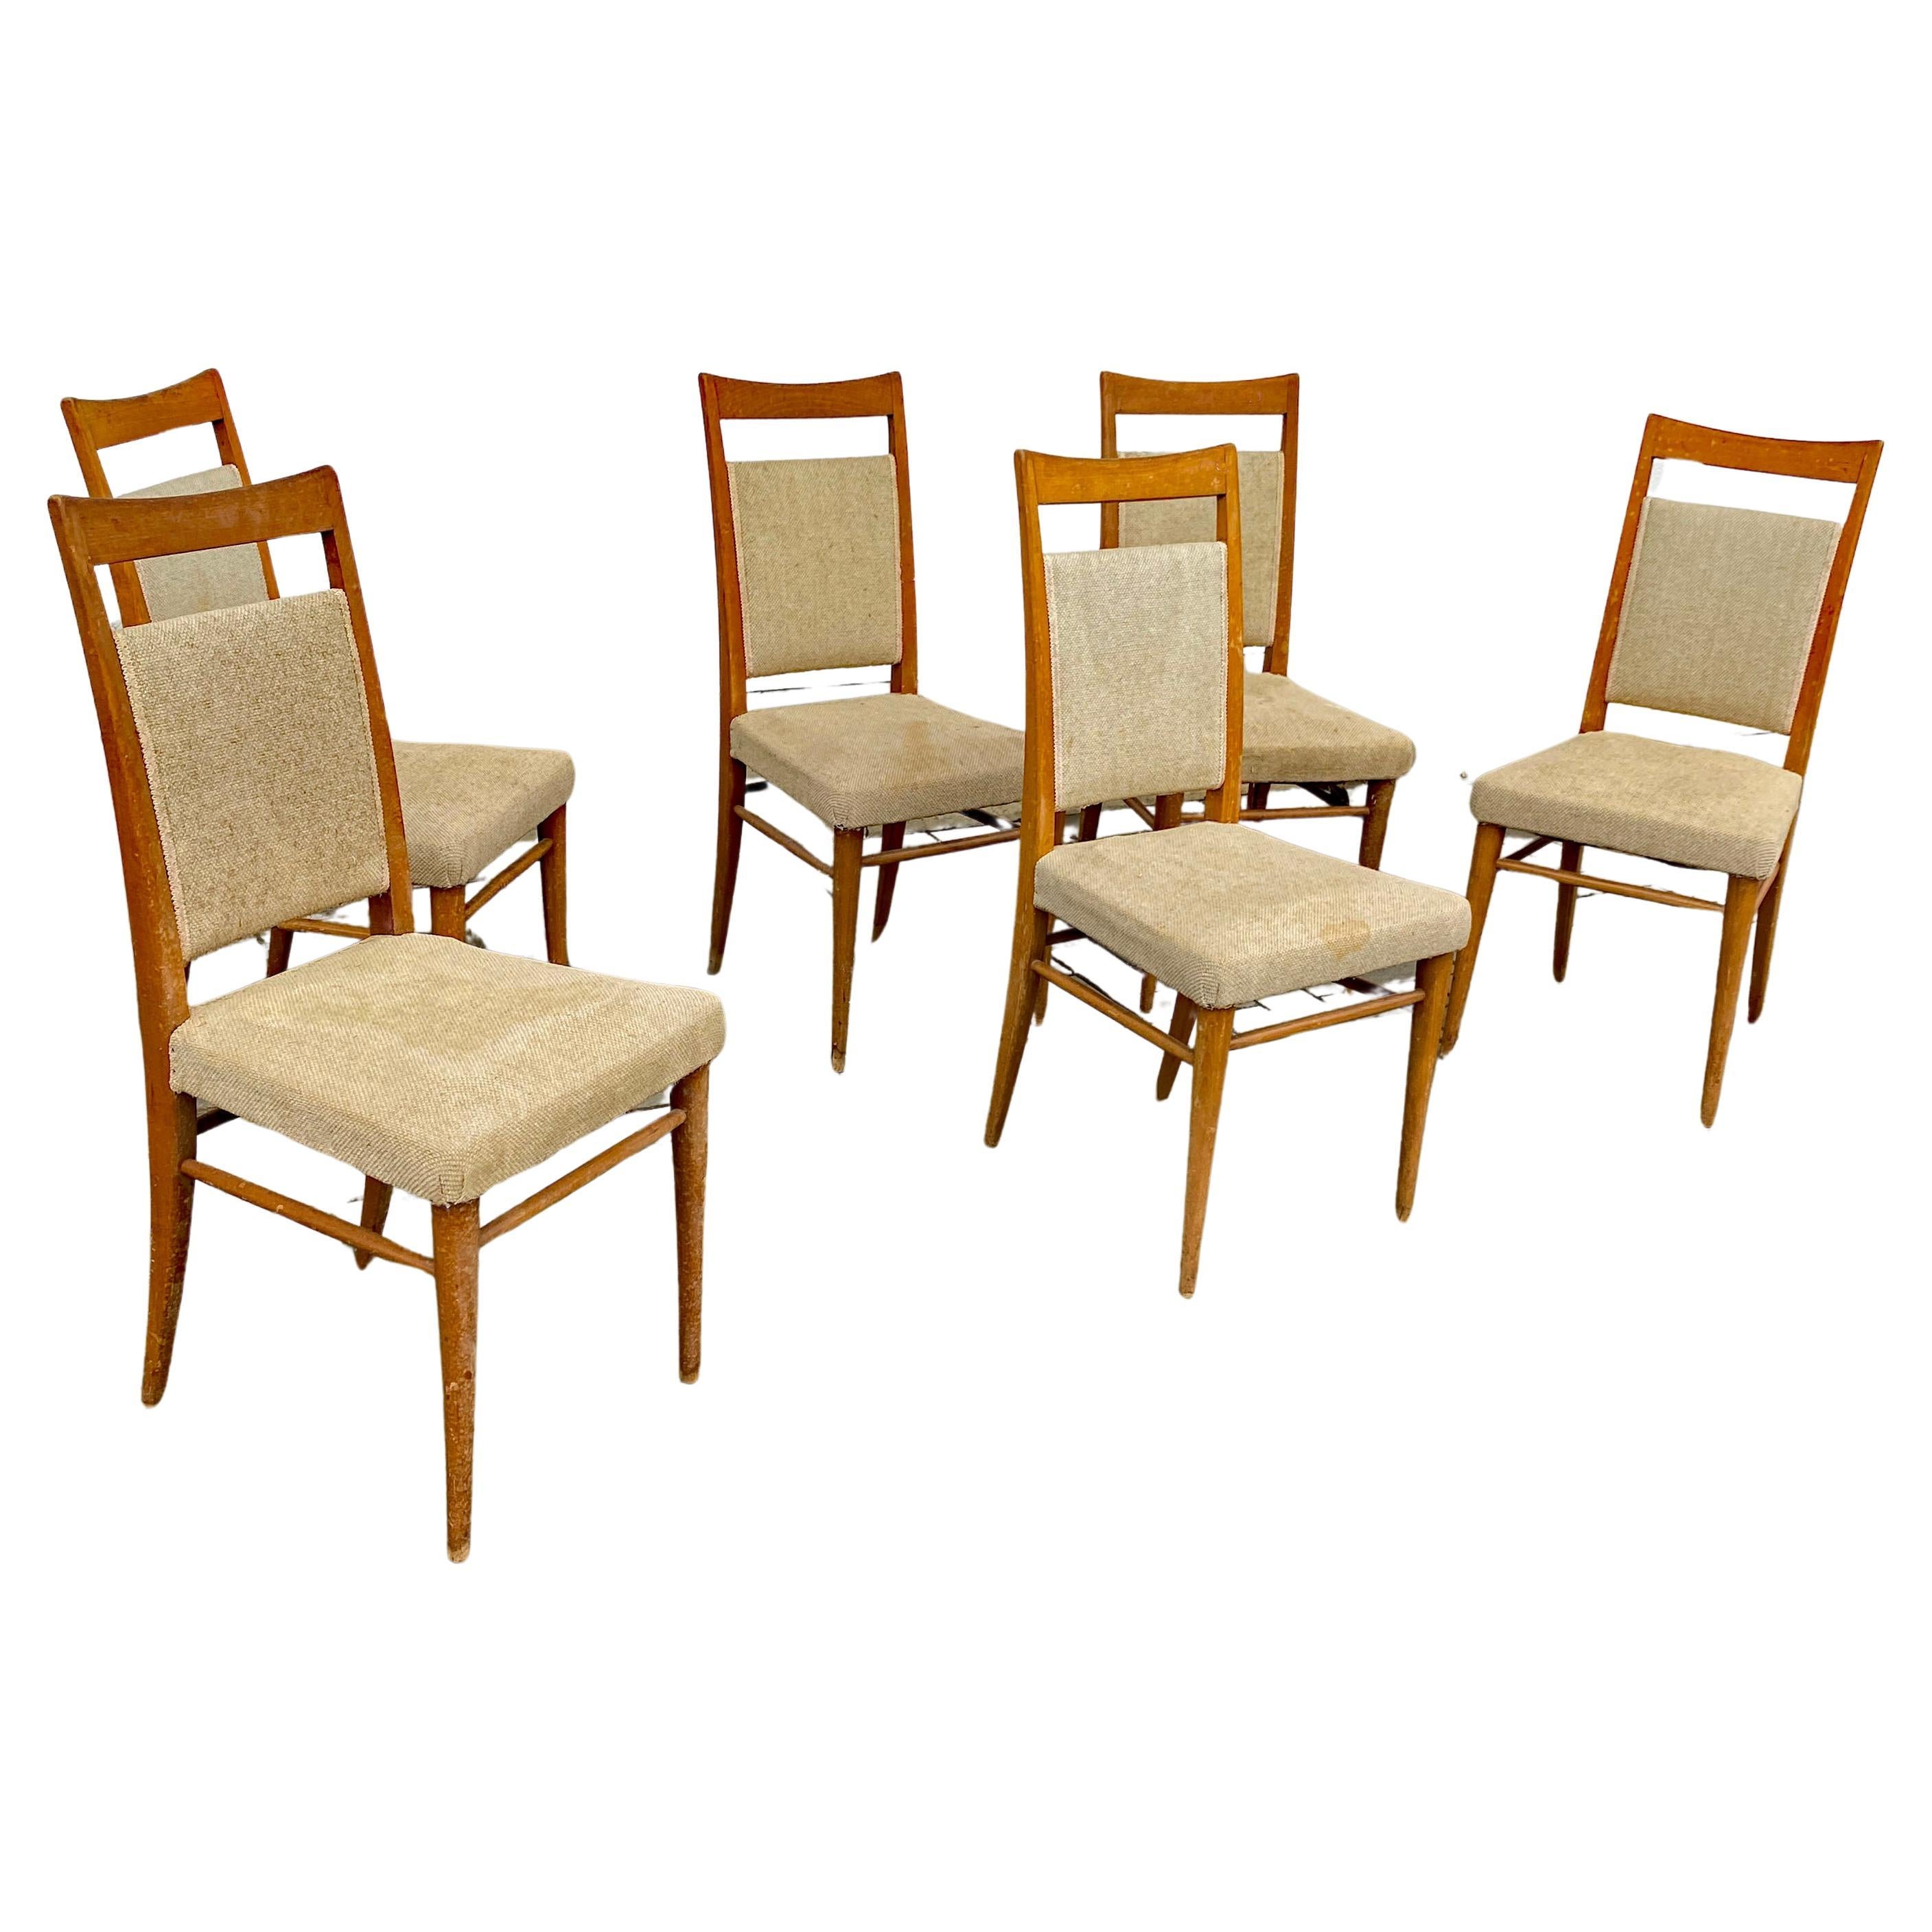 suite of 6 chairs circa 1950/1960 patina and fabric to be redone For Sale